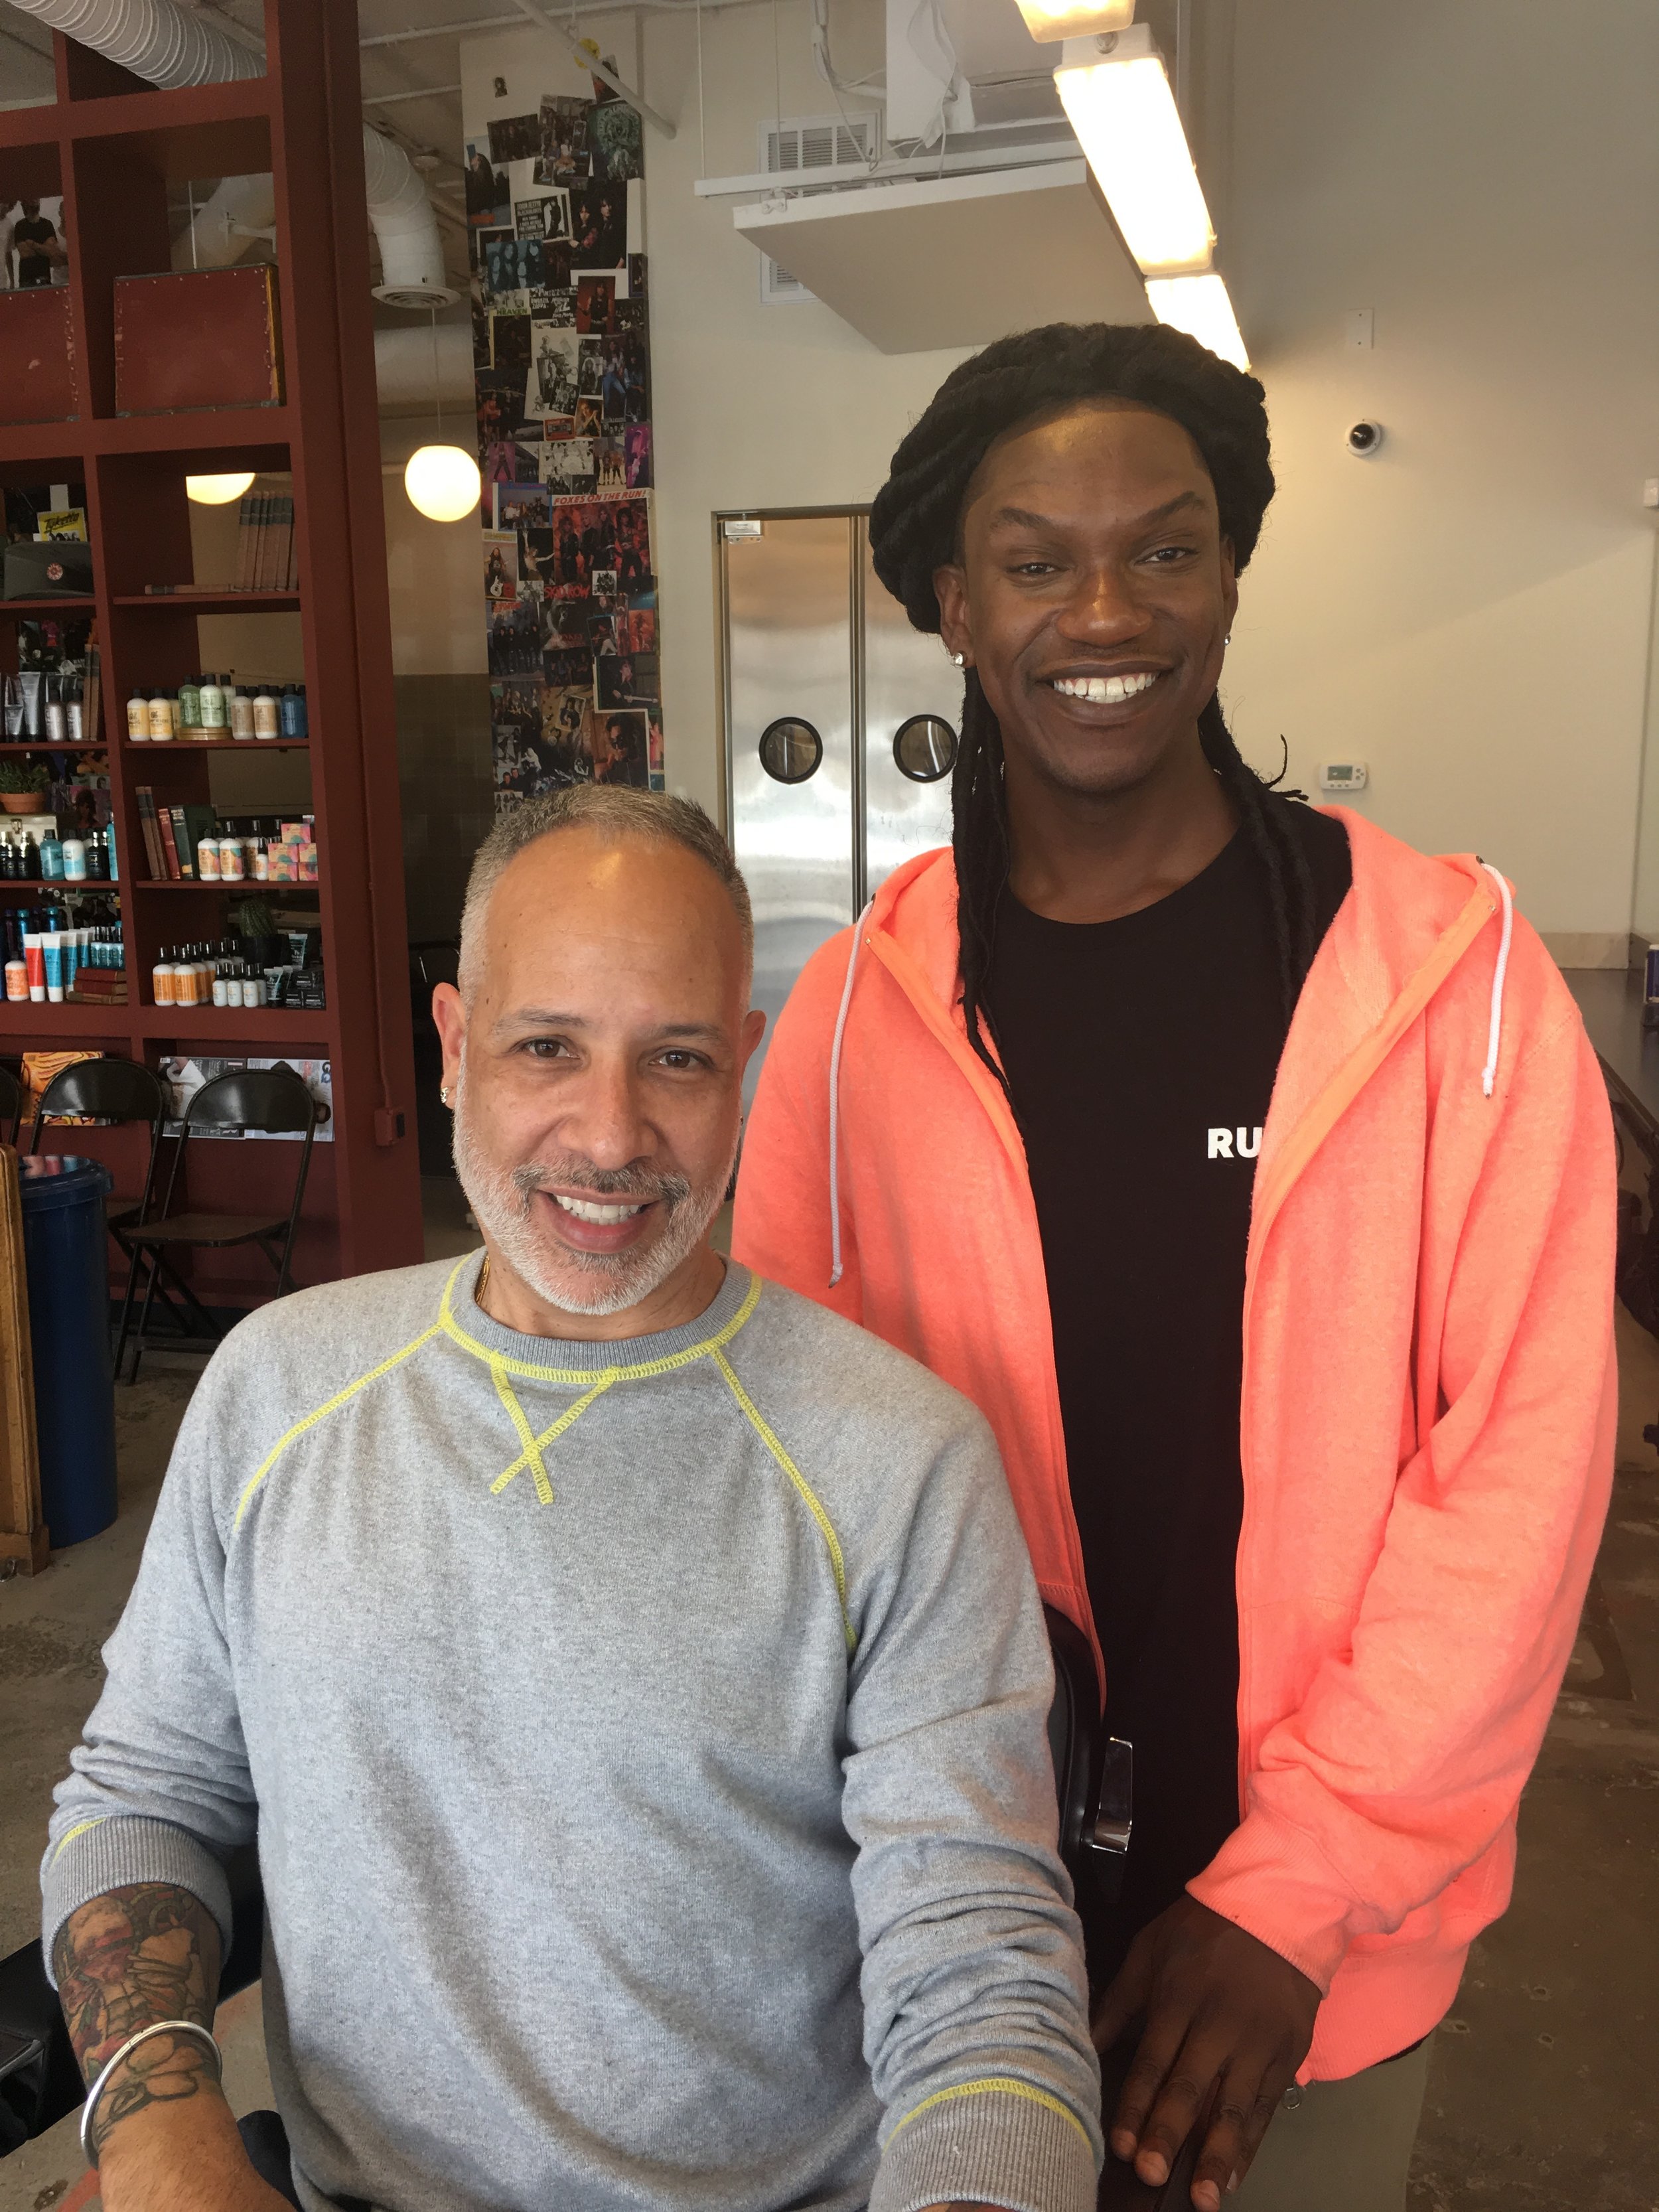 Check out Michael for your next cut! He is wonderful and will take great care of you.